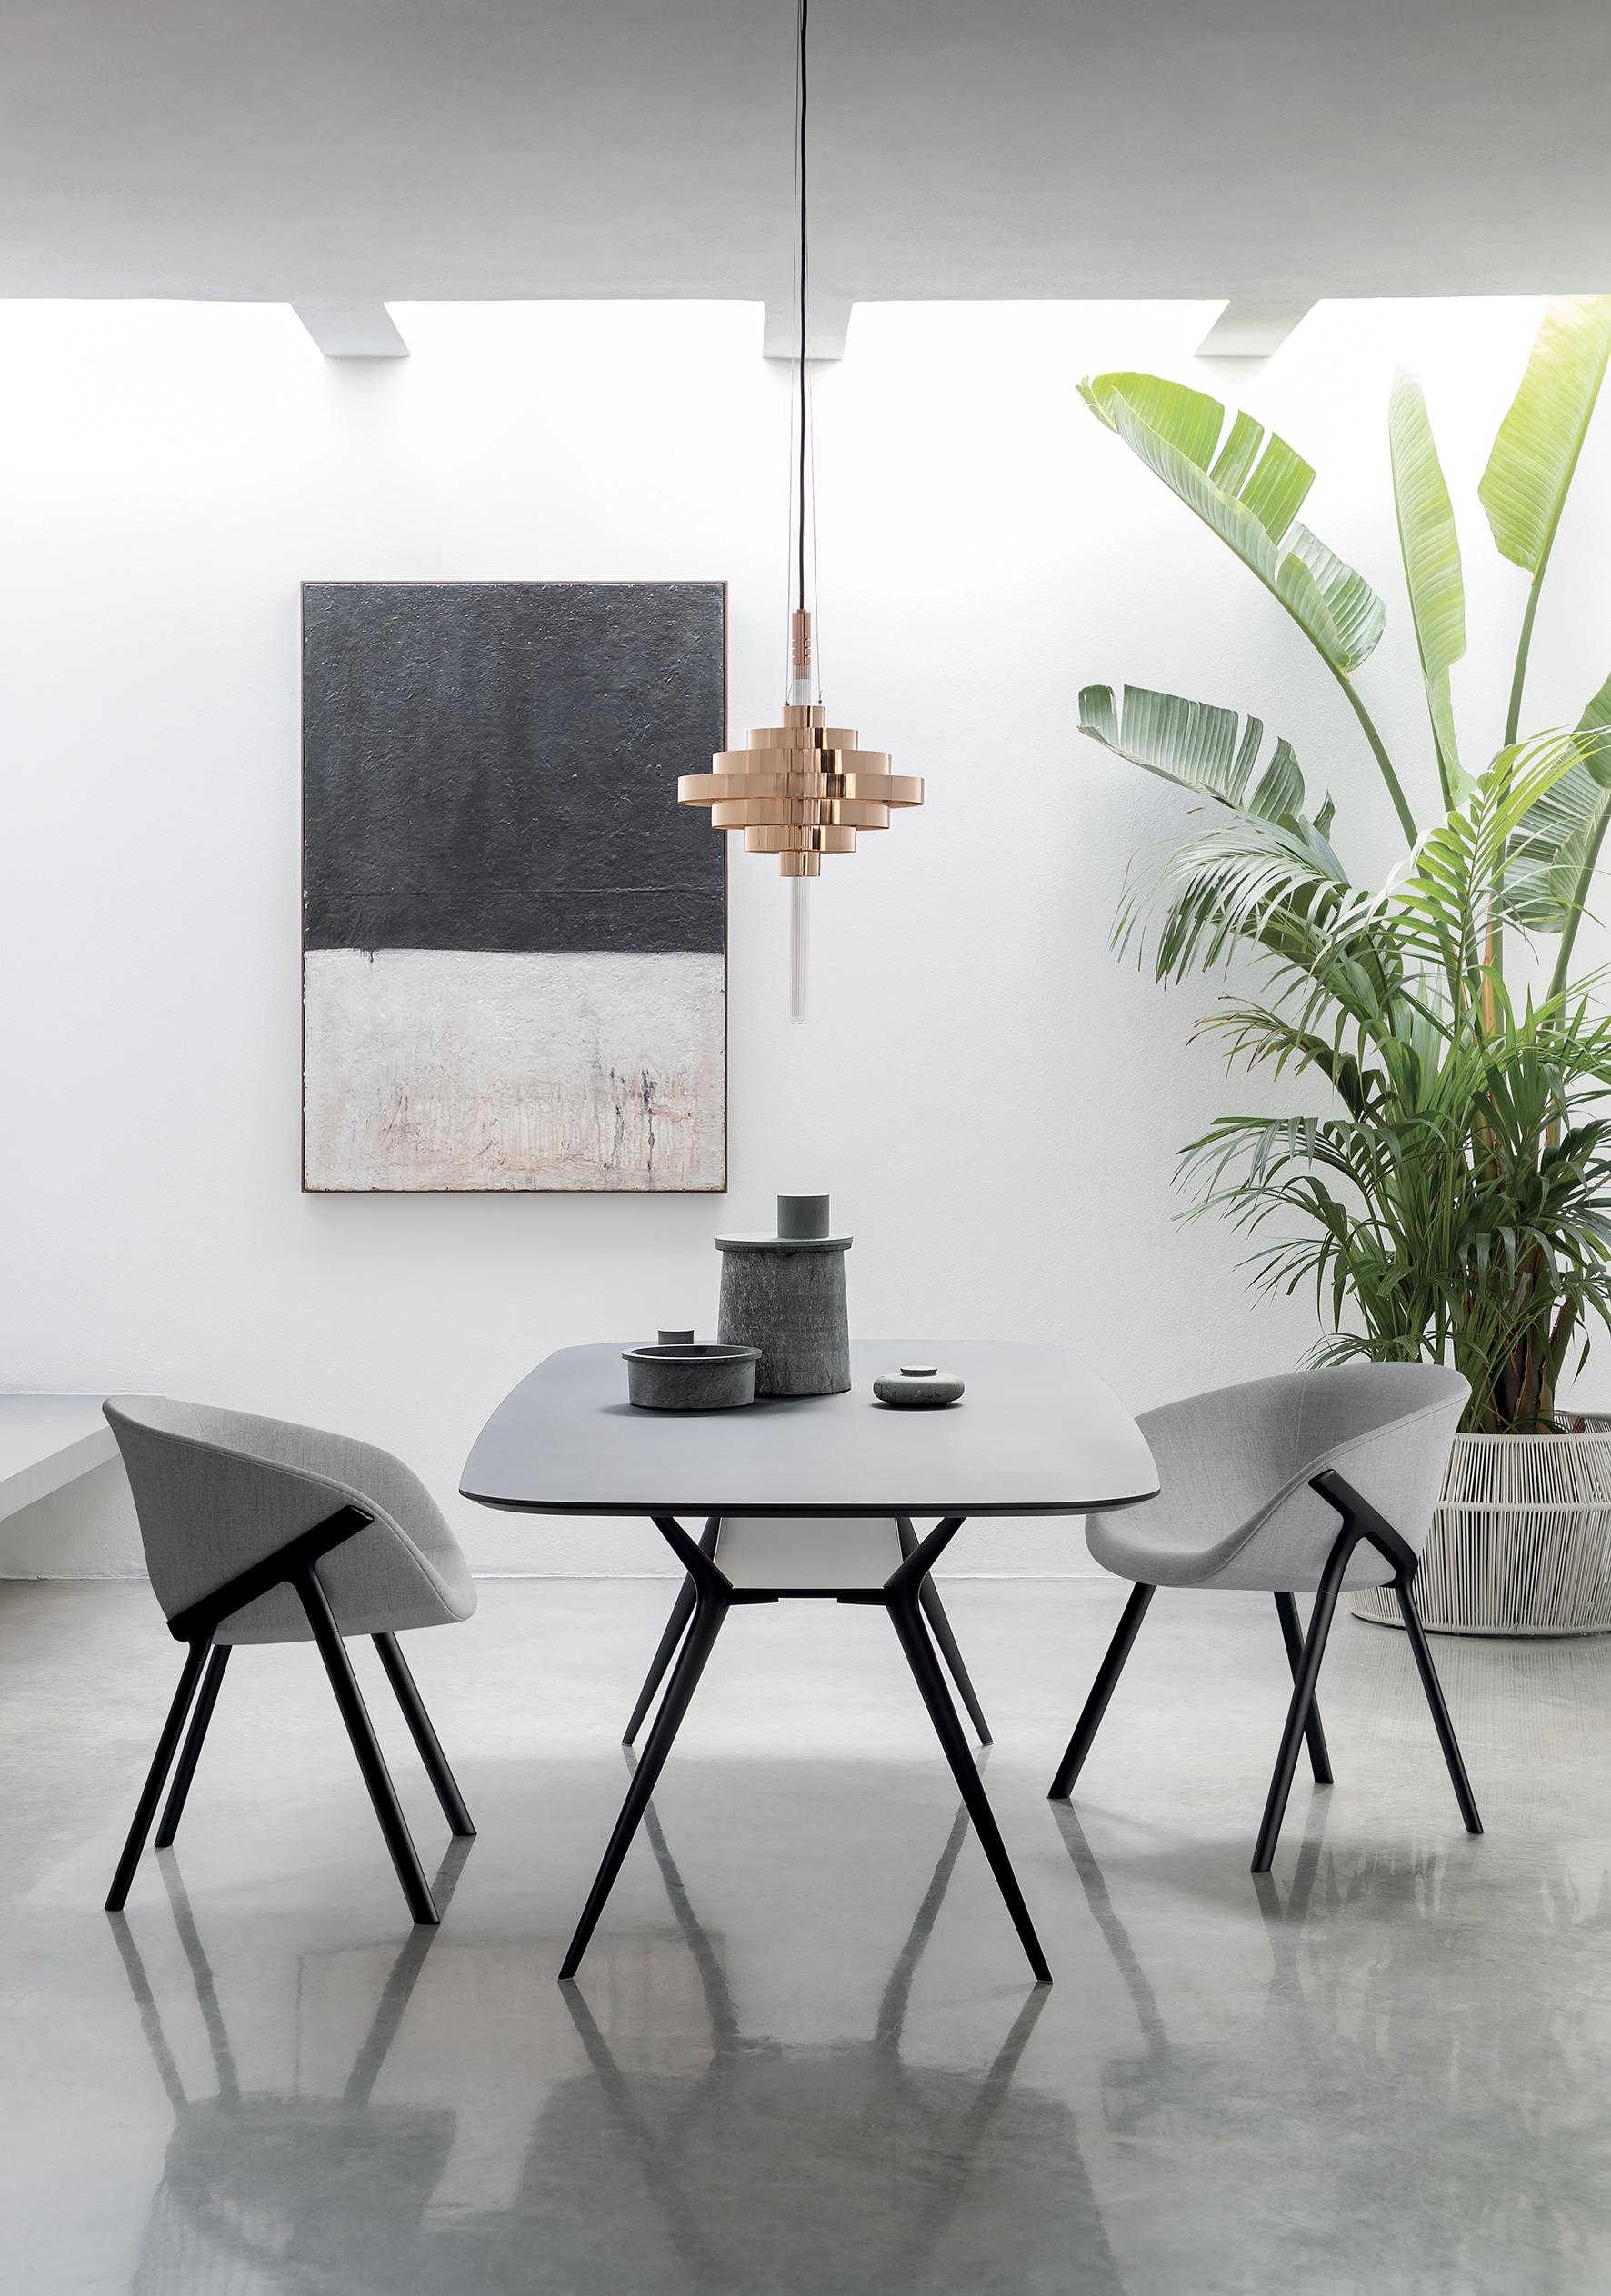 Alias Biplane 401 Table in Black MDF Top with Black Lacquered Aluminium Frame by Alberto Meda

Round table with structure composed of 3 legs in die-cast aluminium with painted or polished finishes, connected by a shelf.
Top available in: -